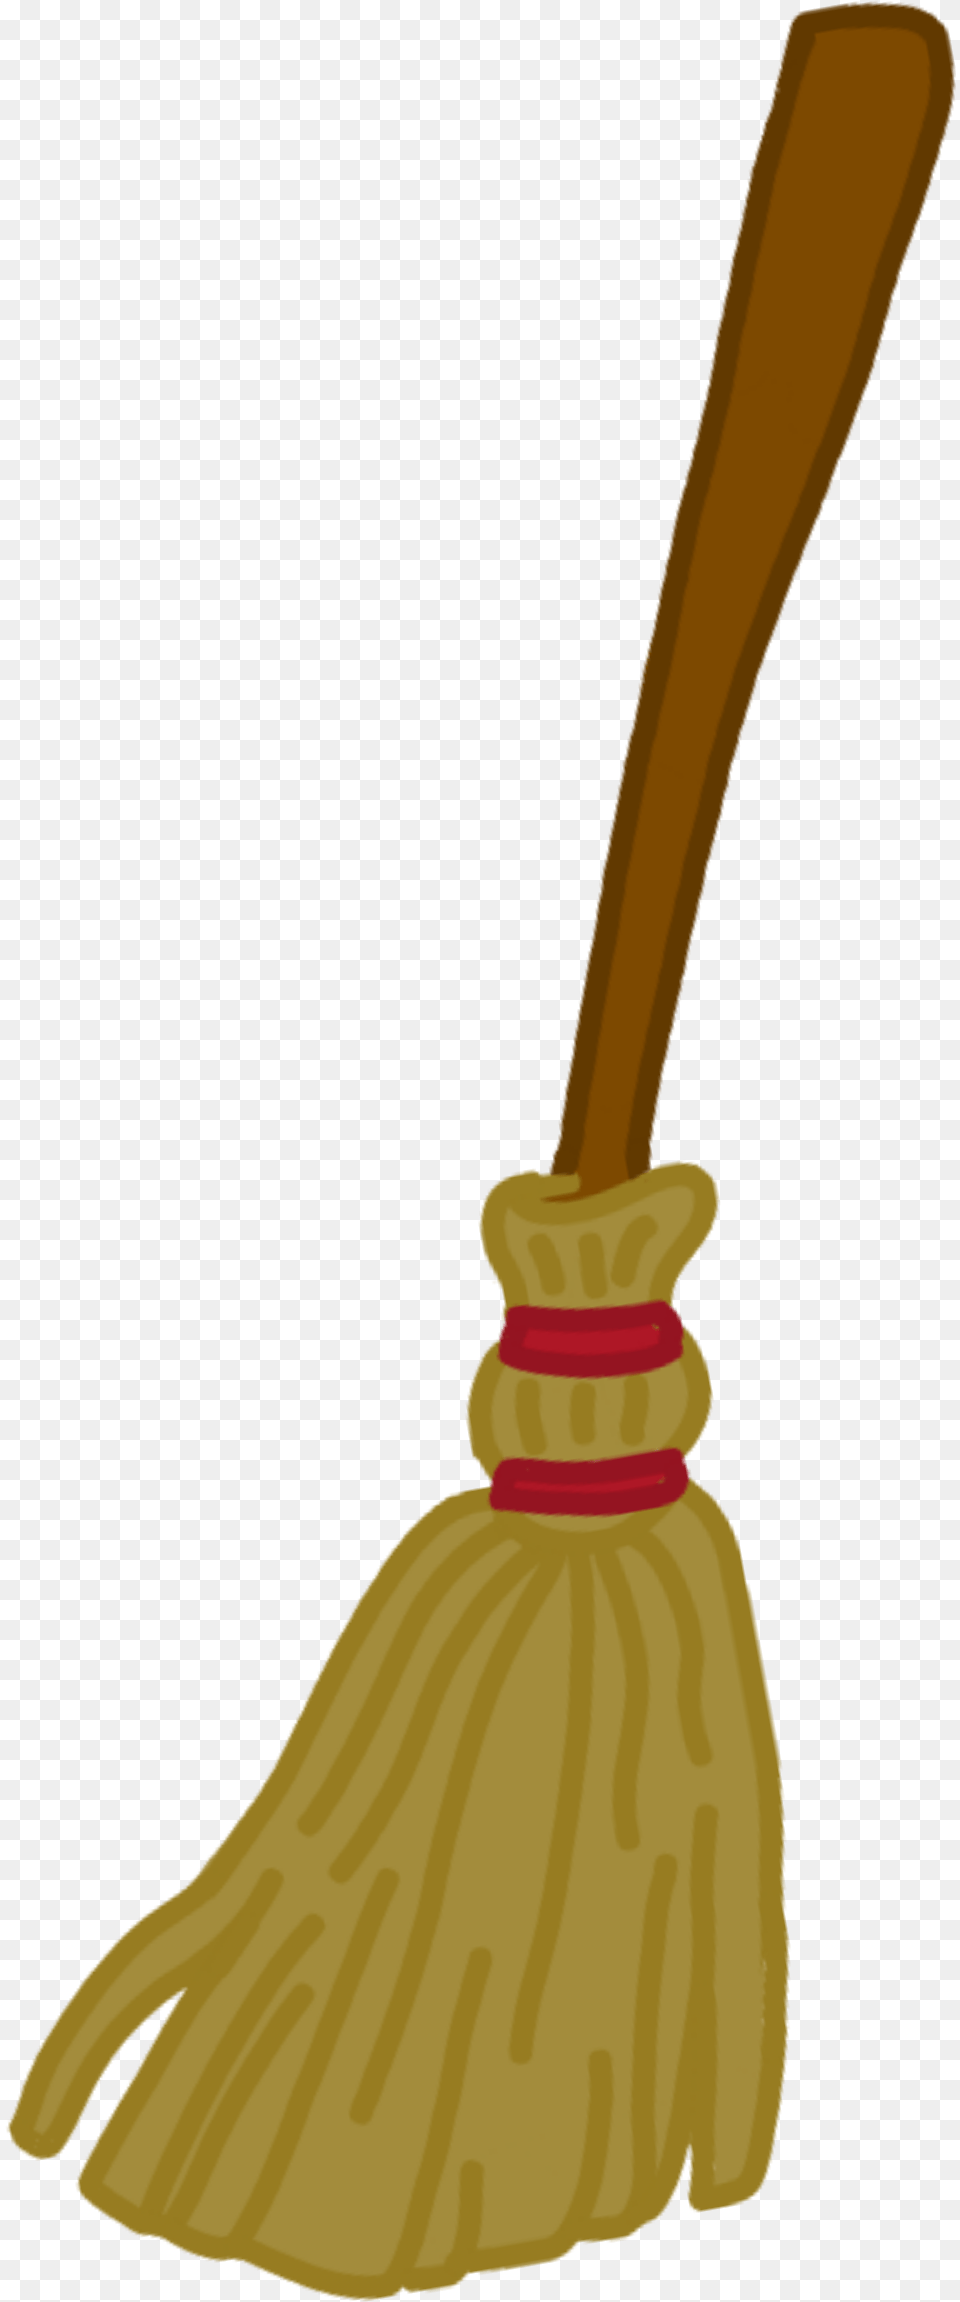 October Halloween Witch Illustration, Broom, Smoke Pipe Png